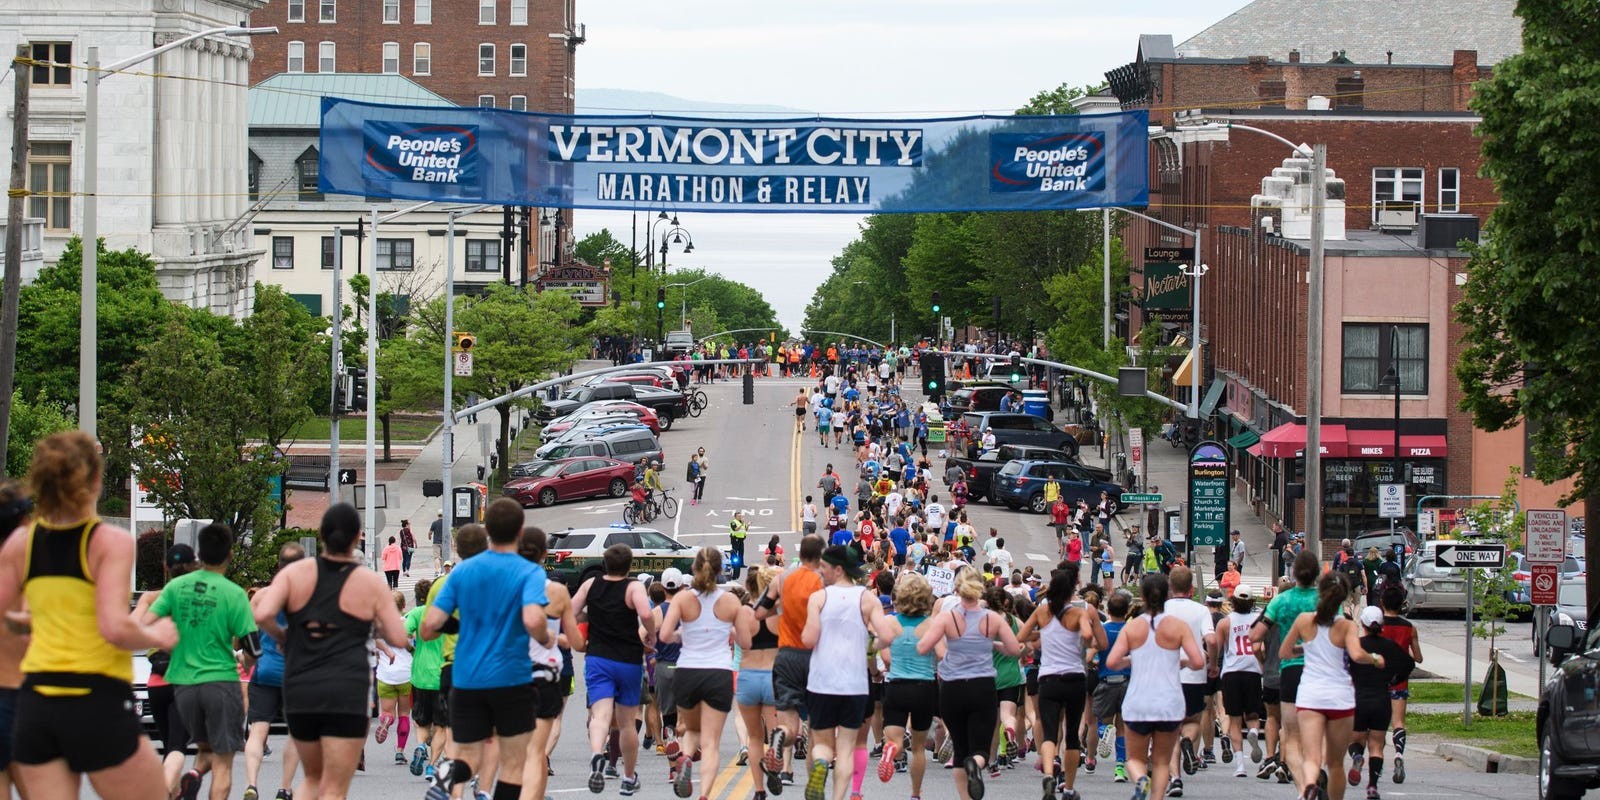 The 2020 Vermont City Marathon now postponed until may 30 2021 due to